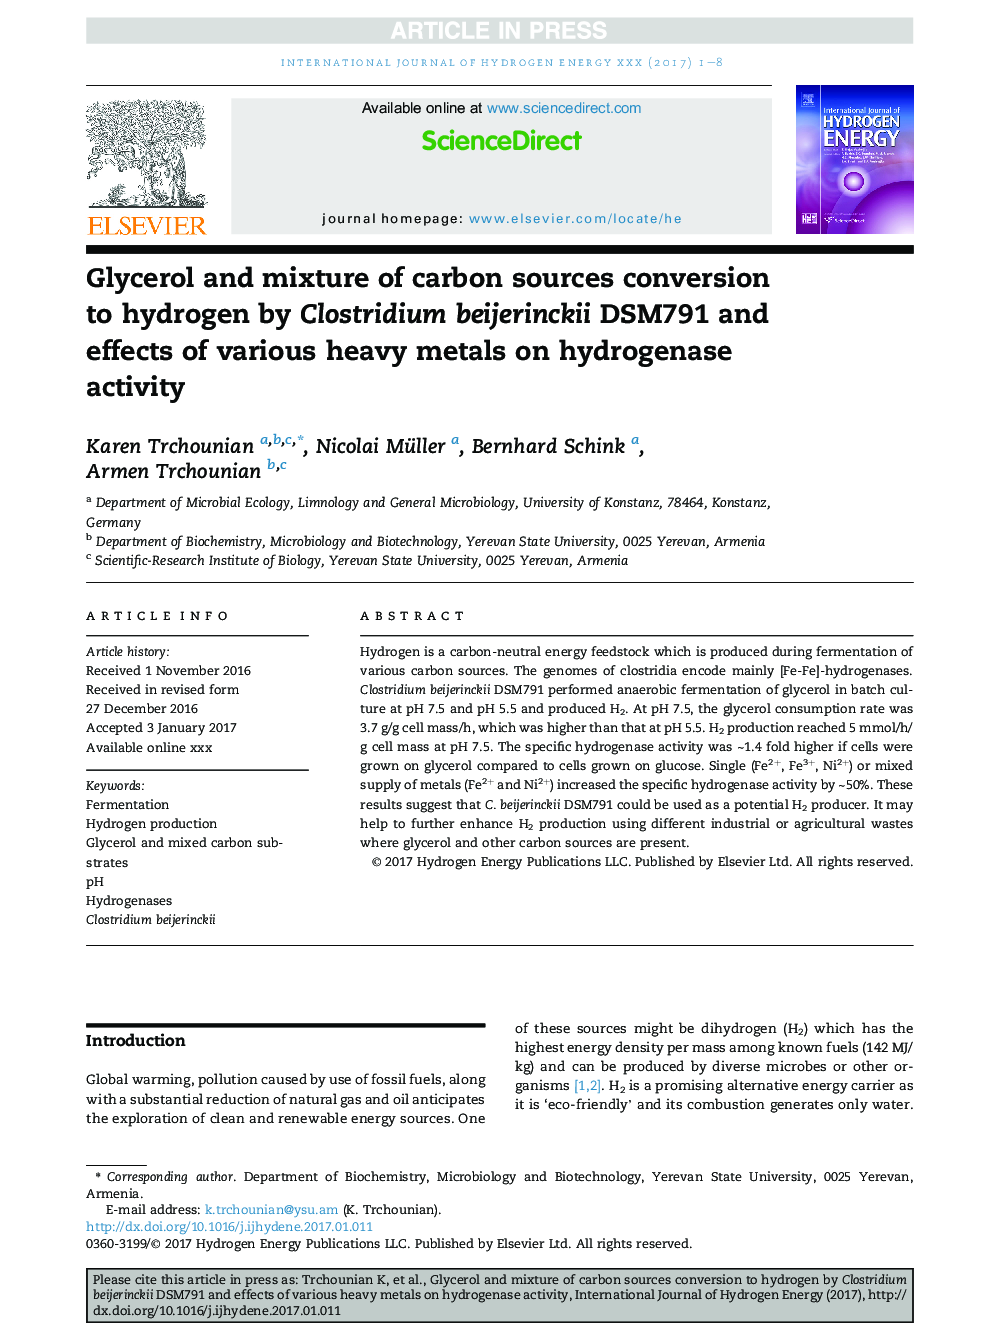 Glycerol and mixture of carbon sources conversion to hydrogen by Clostridium beijerinckii DSM791 and effects of various heavy metals on hydrogenase activity